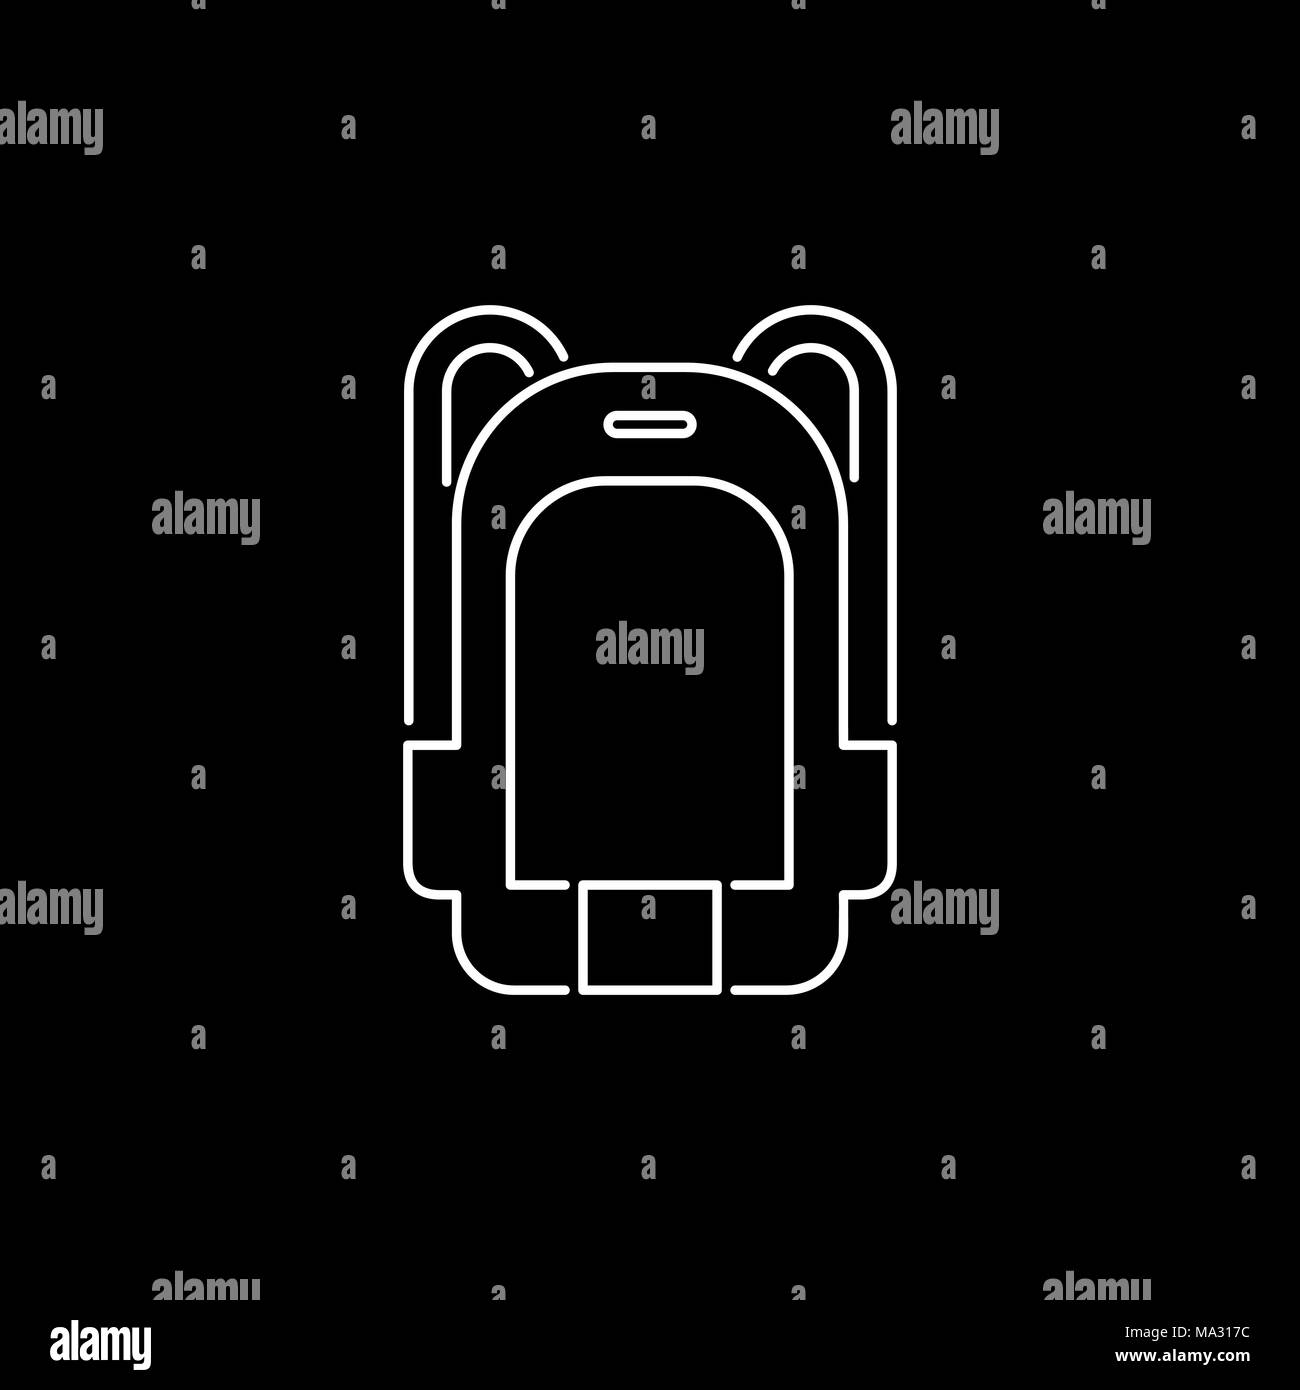 Backpack icon simple flat style symbol illustration. Stock Vector